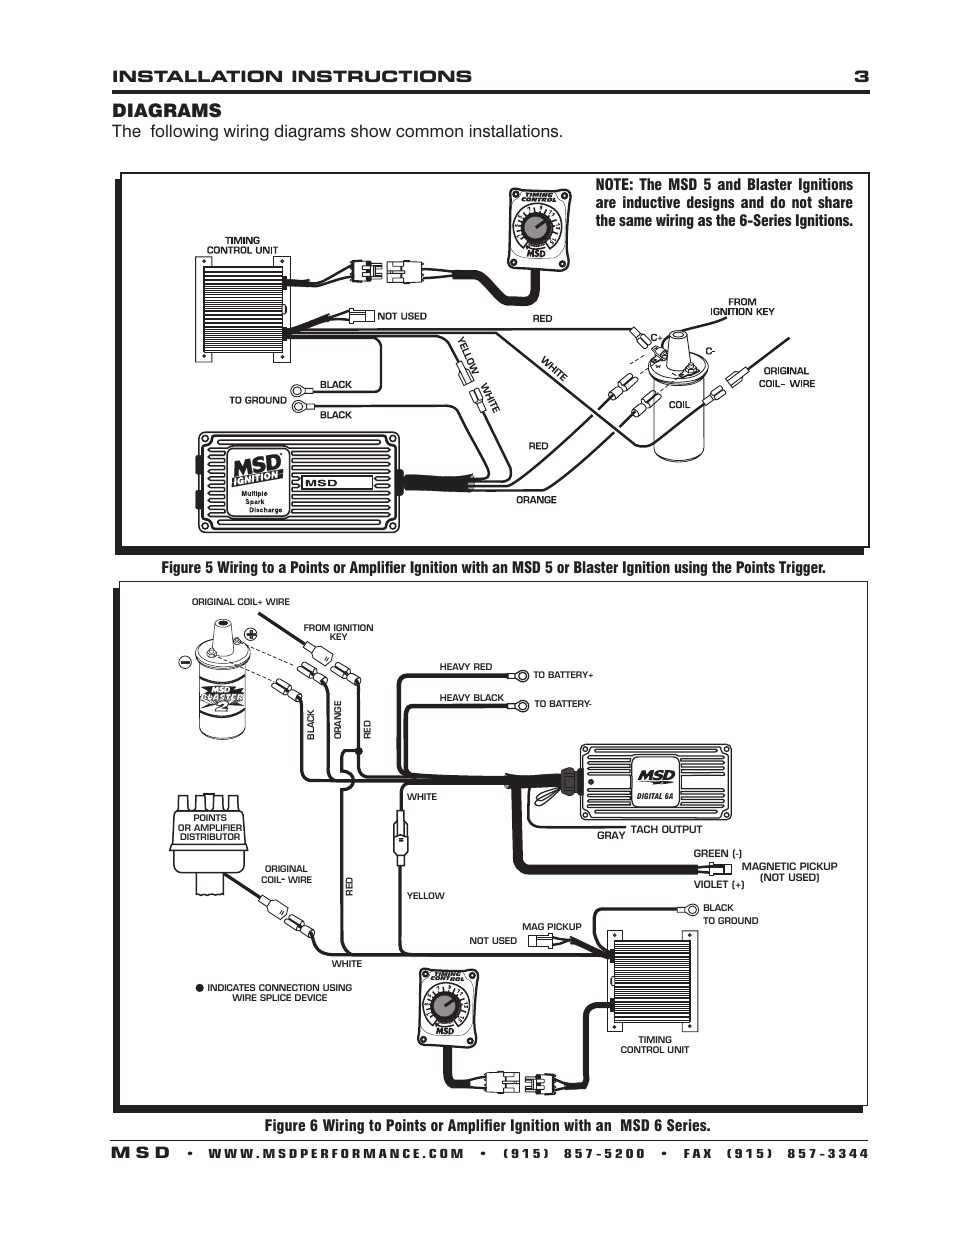 Diagrams, Installation instructions 3 m s d | MSD 8680 Adjustable Timing  Control Installation User Manual | Page 3 / 8 Free MSD Wiring Diagrams Manuals Directory